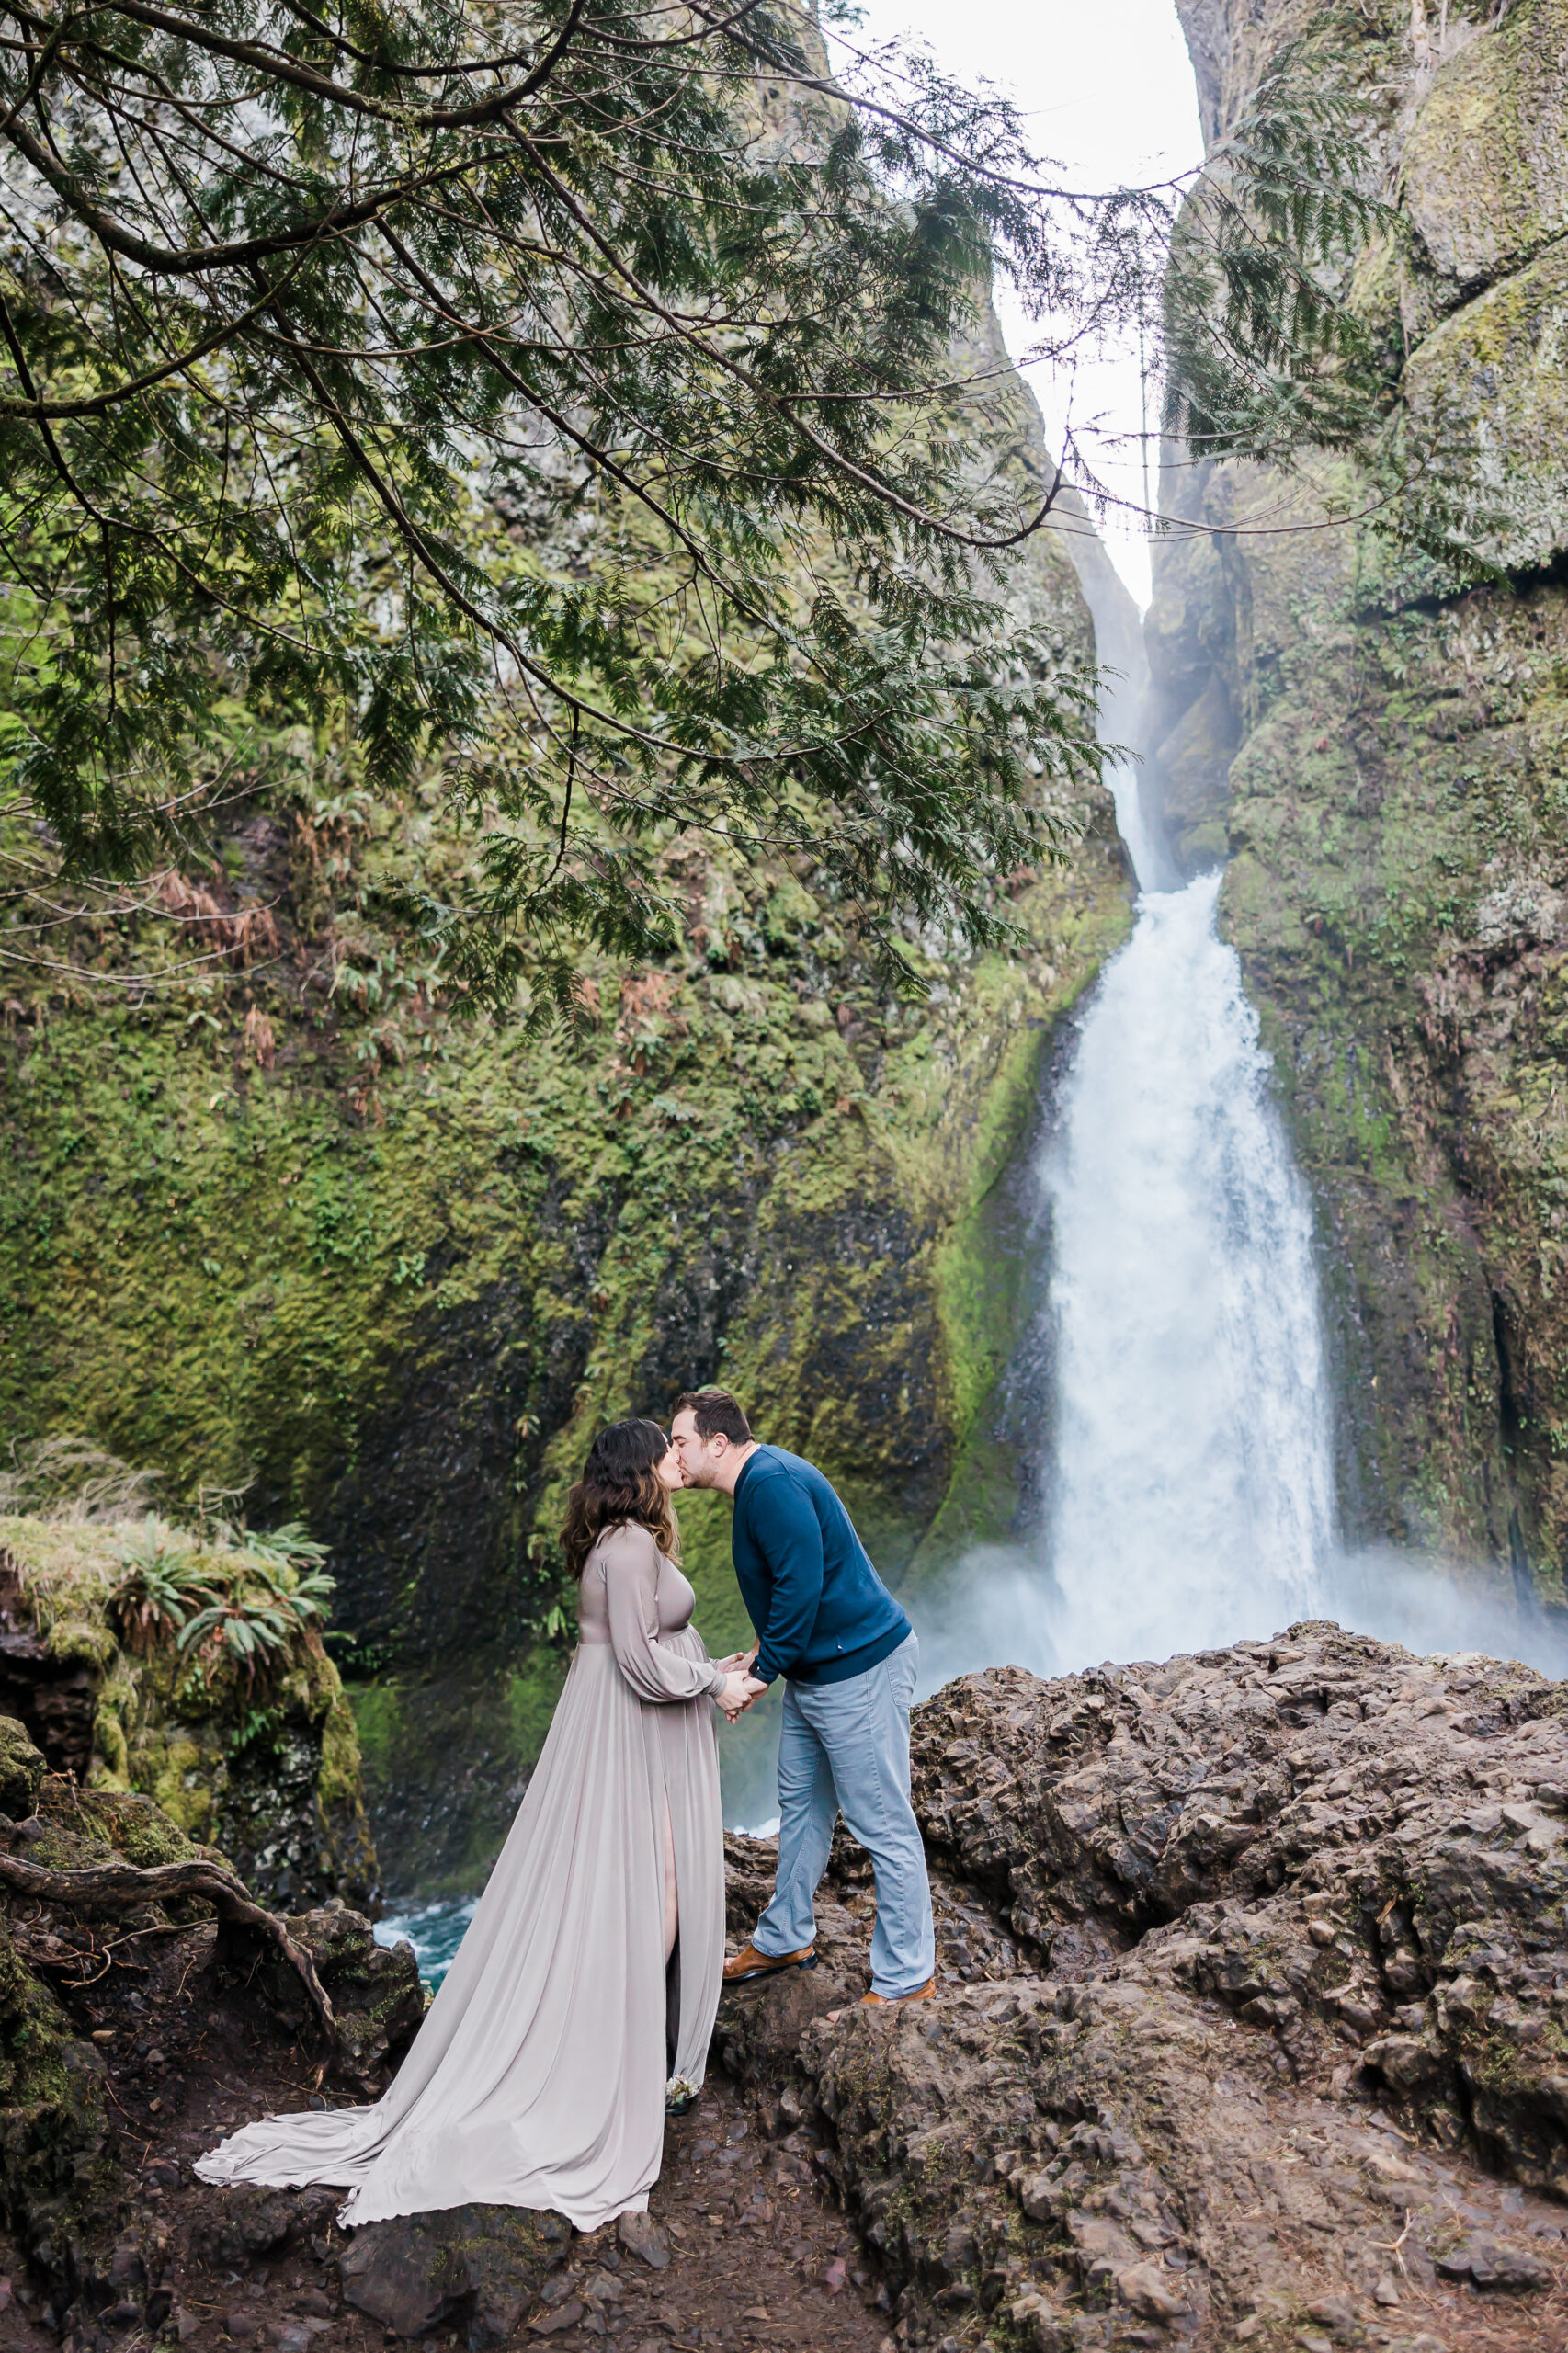 pregnant woman and man kissing at a waterfall portland baby shower venues